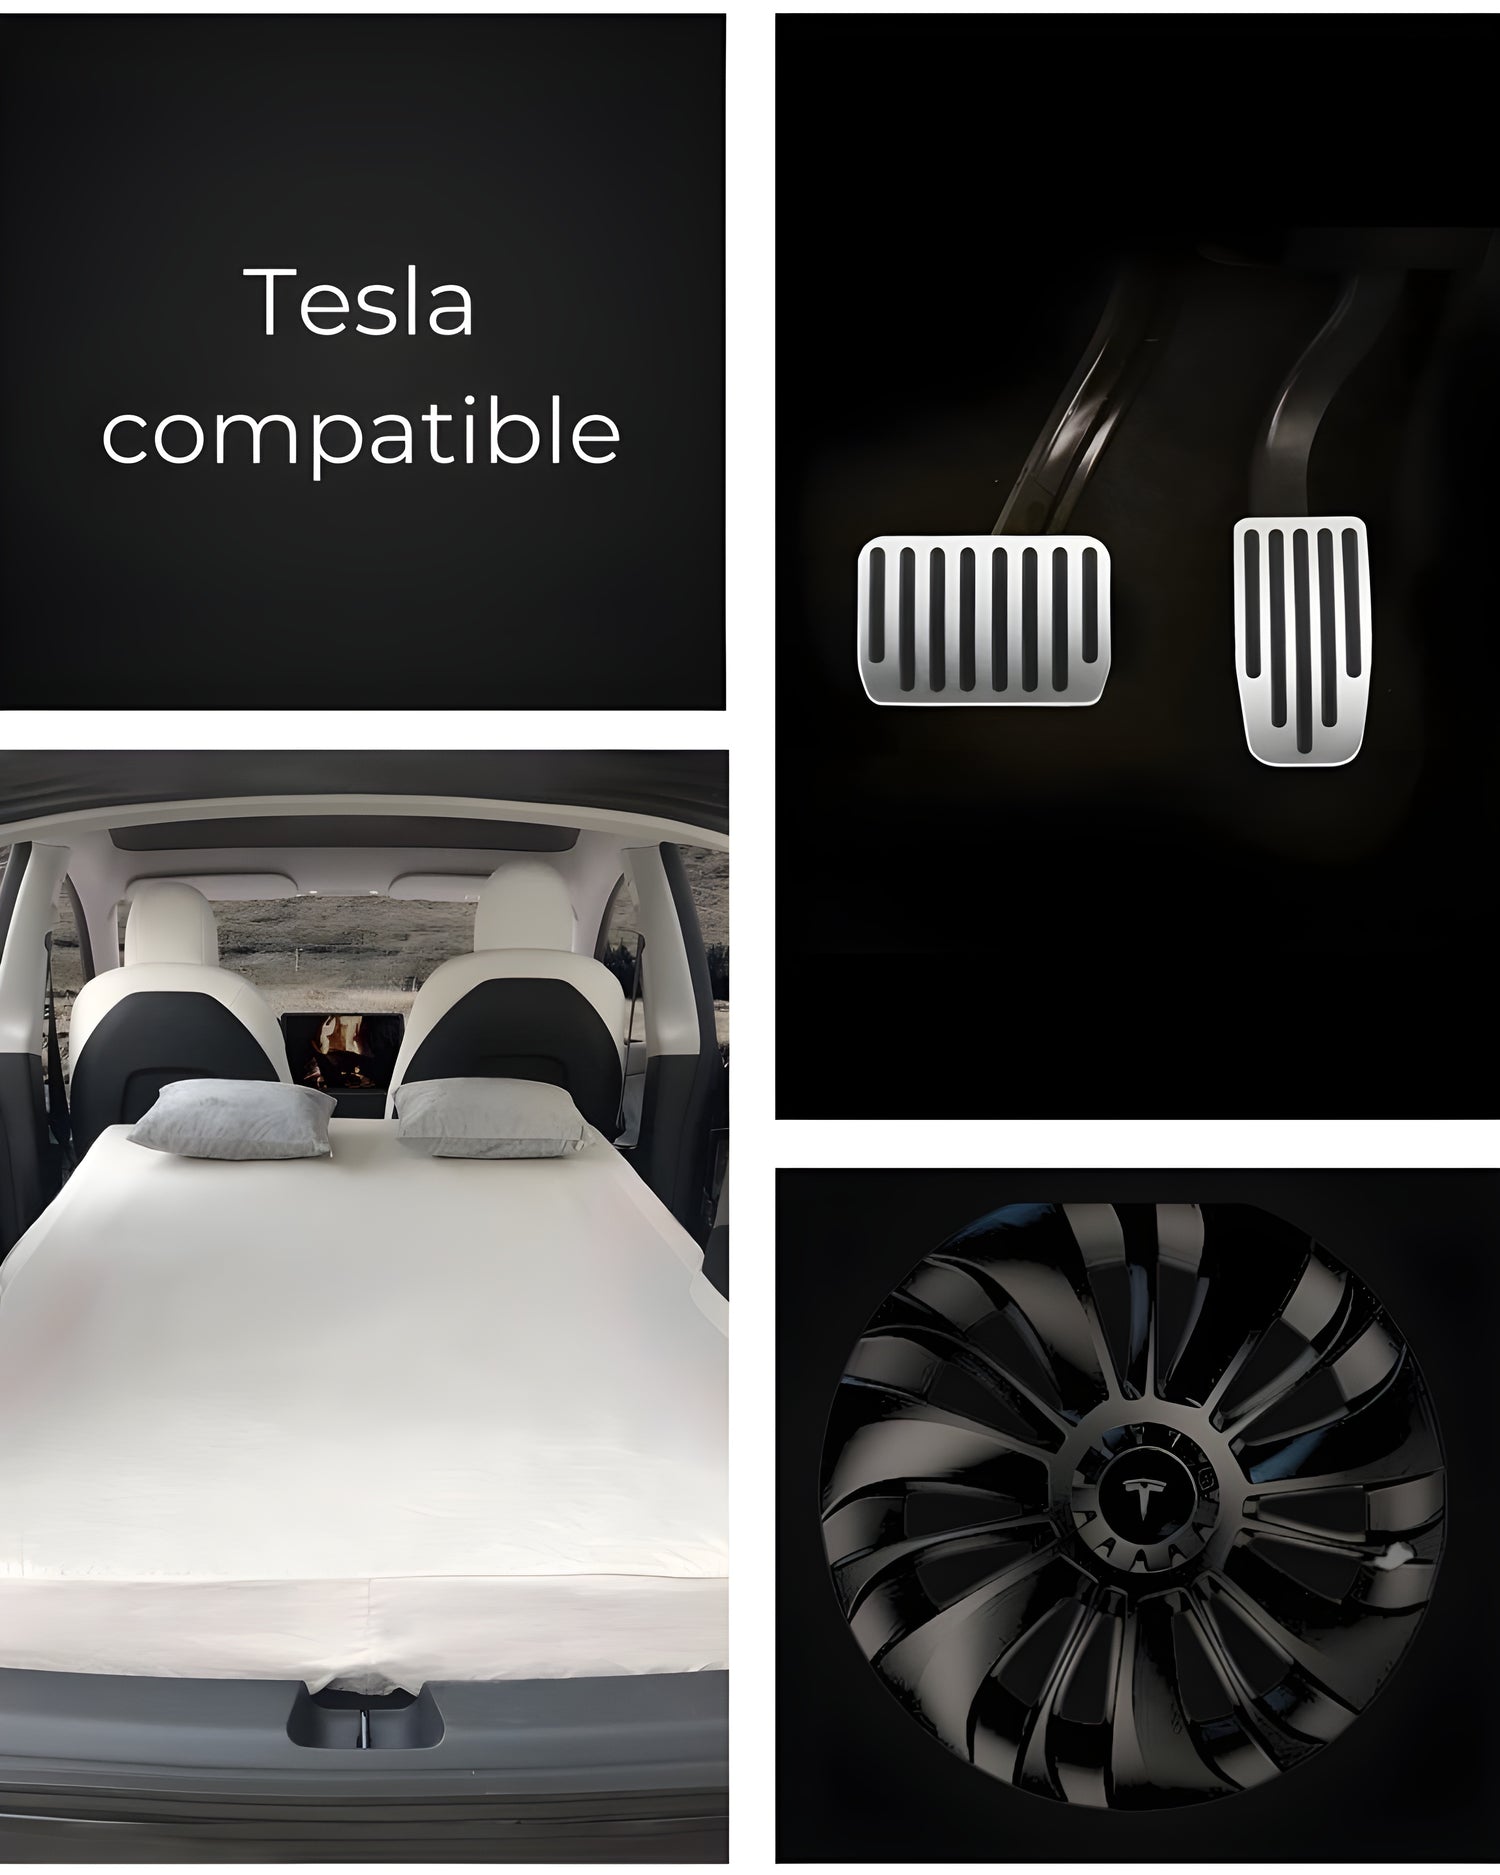 A promotional collage for Clevisco Automotive's Tesla-compatible accessories. Featured are sleek pedal covers, a bespoke car mattress for Tesla interiors, and a glossy wheel cover with the Tesla emblem, all emphasizing quality and design.